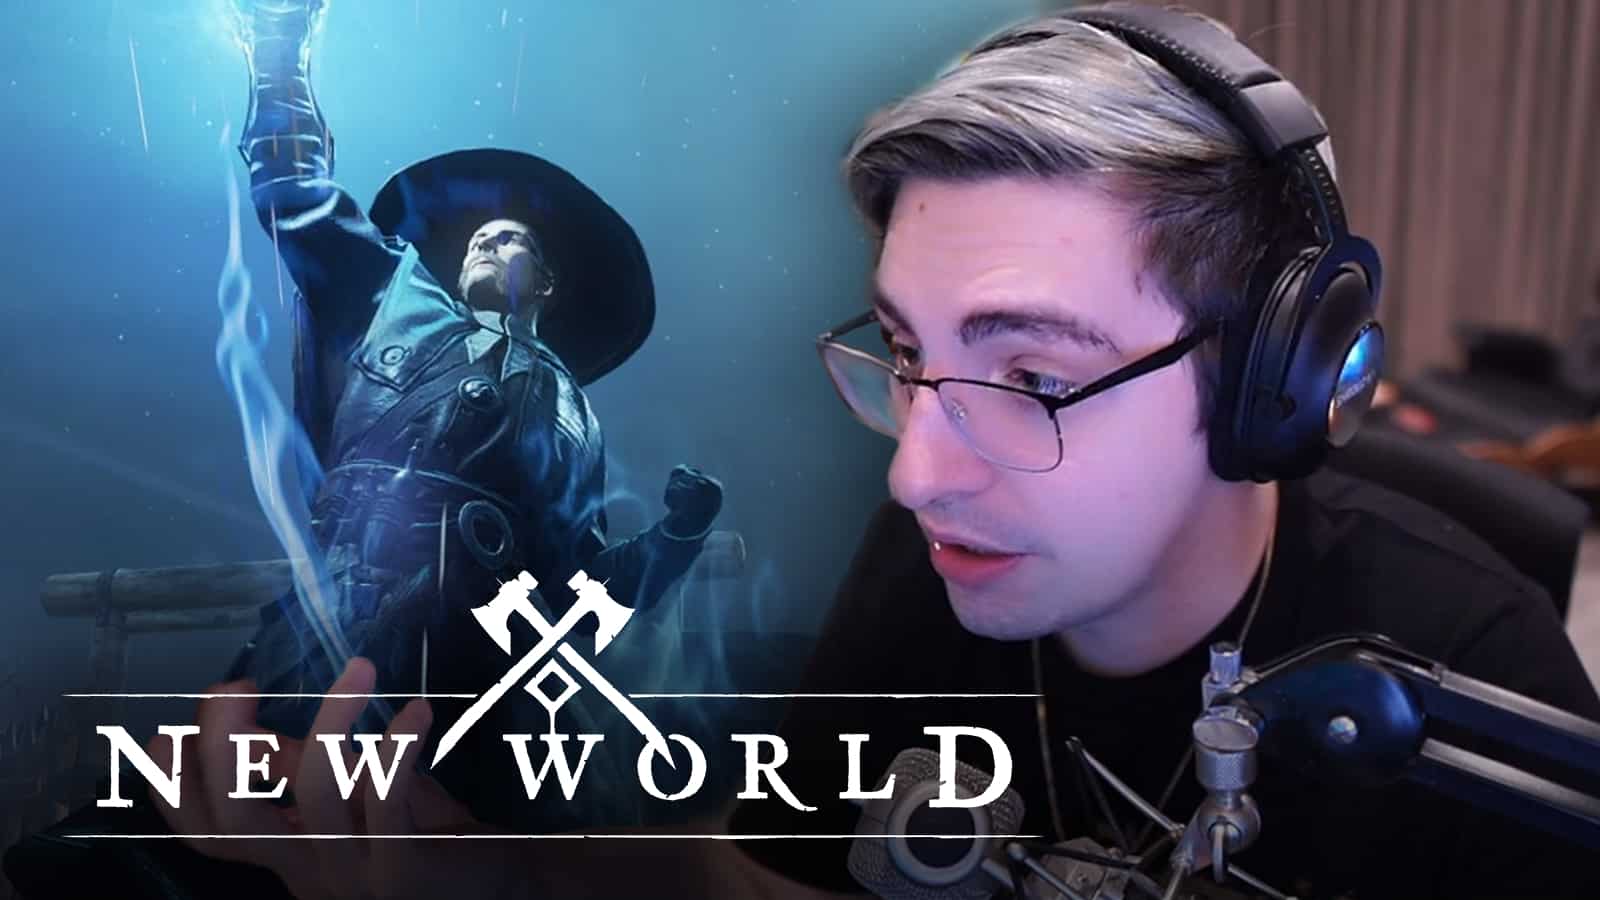 Shroud looks at New World logo in front of imagery from Amazon Studios new release.